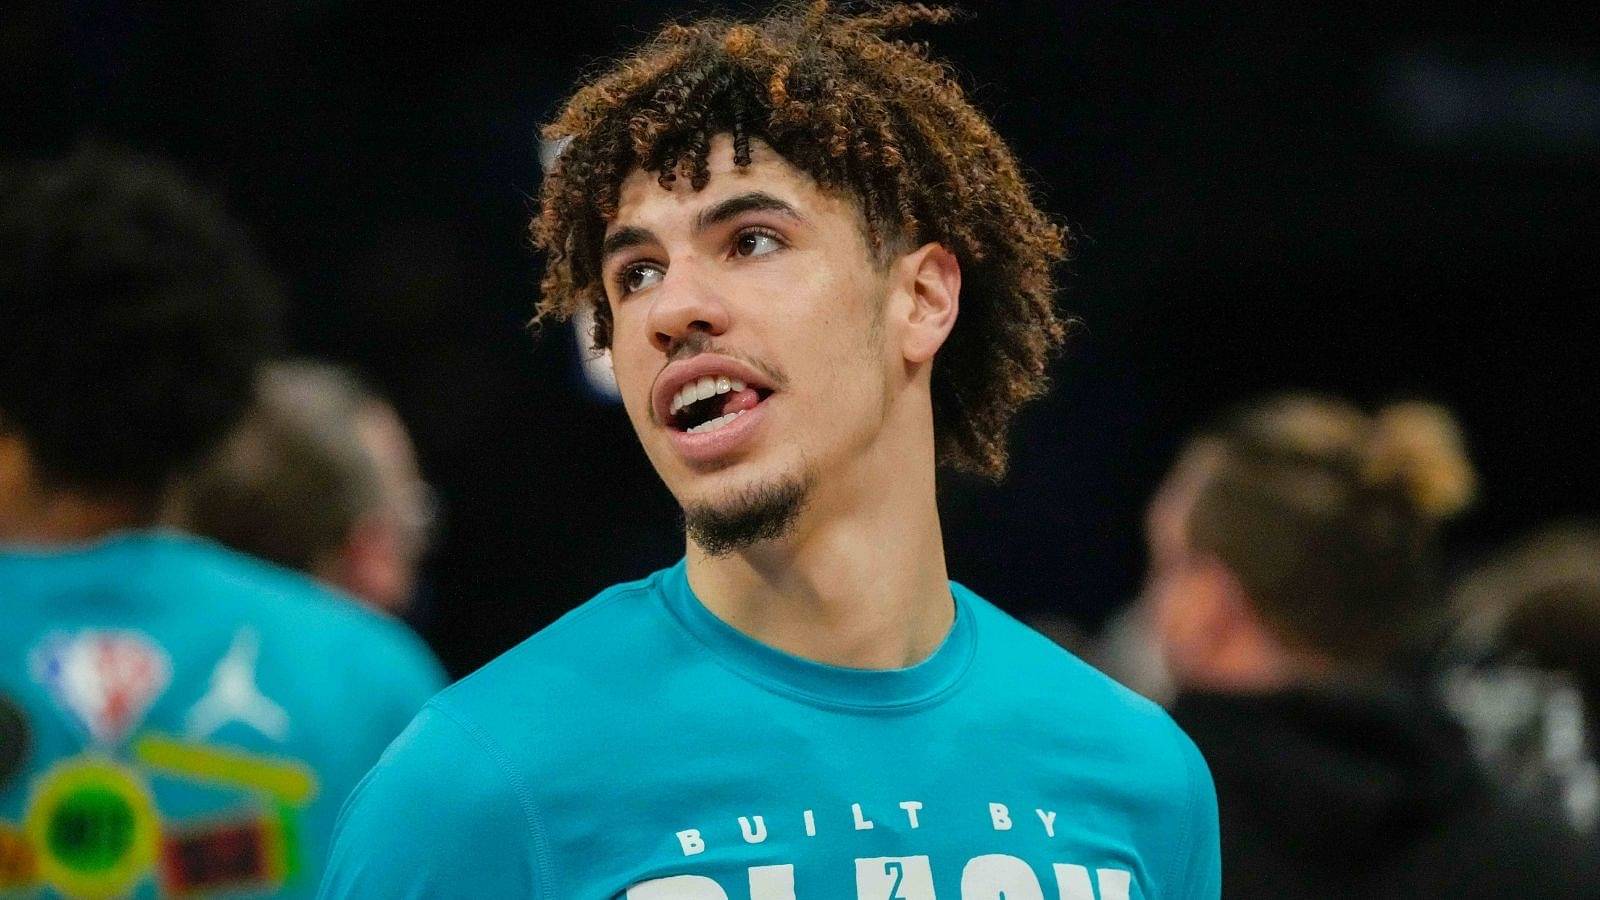 "Sky is the limit for LaMelo Ball": Jamal Crawford and Quentin Richardson are in awe of Hornets All-Star's abilities and maturity at his age